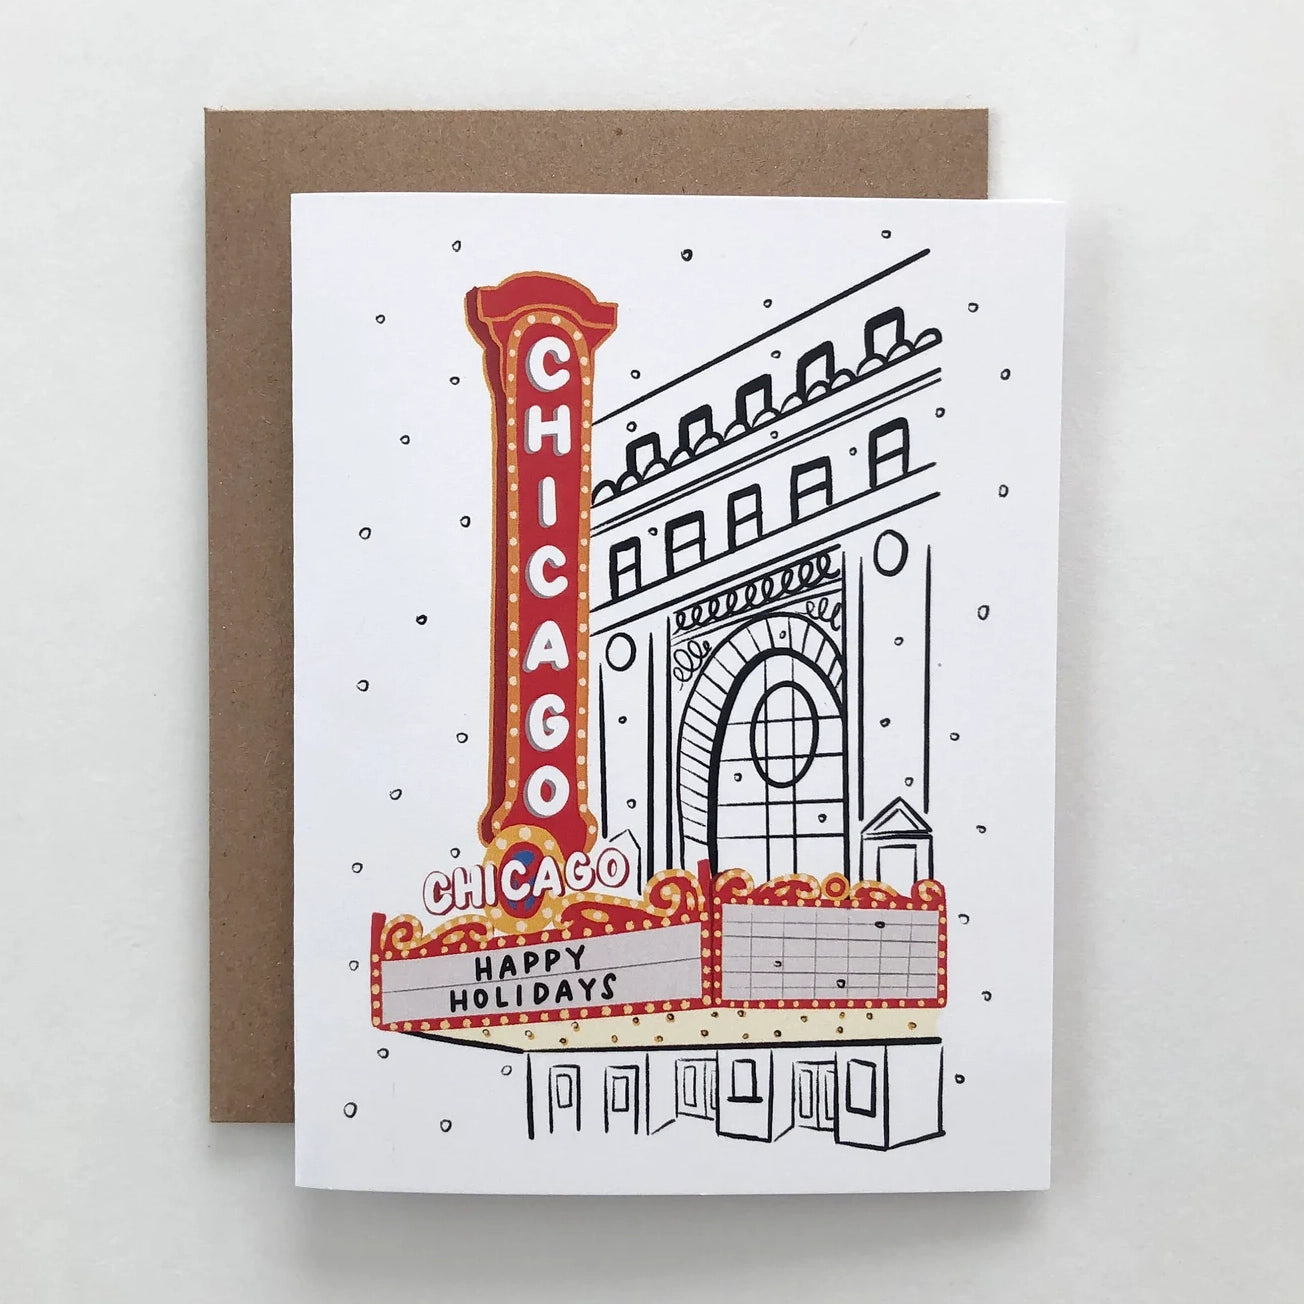 Chicago Theatre Happy Holidays Card